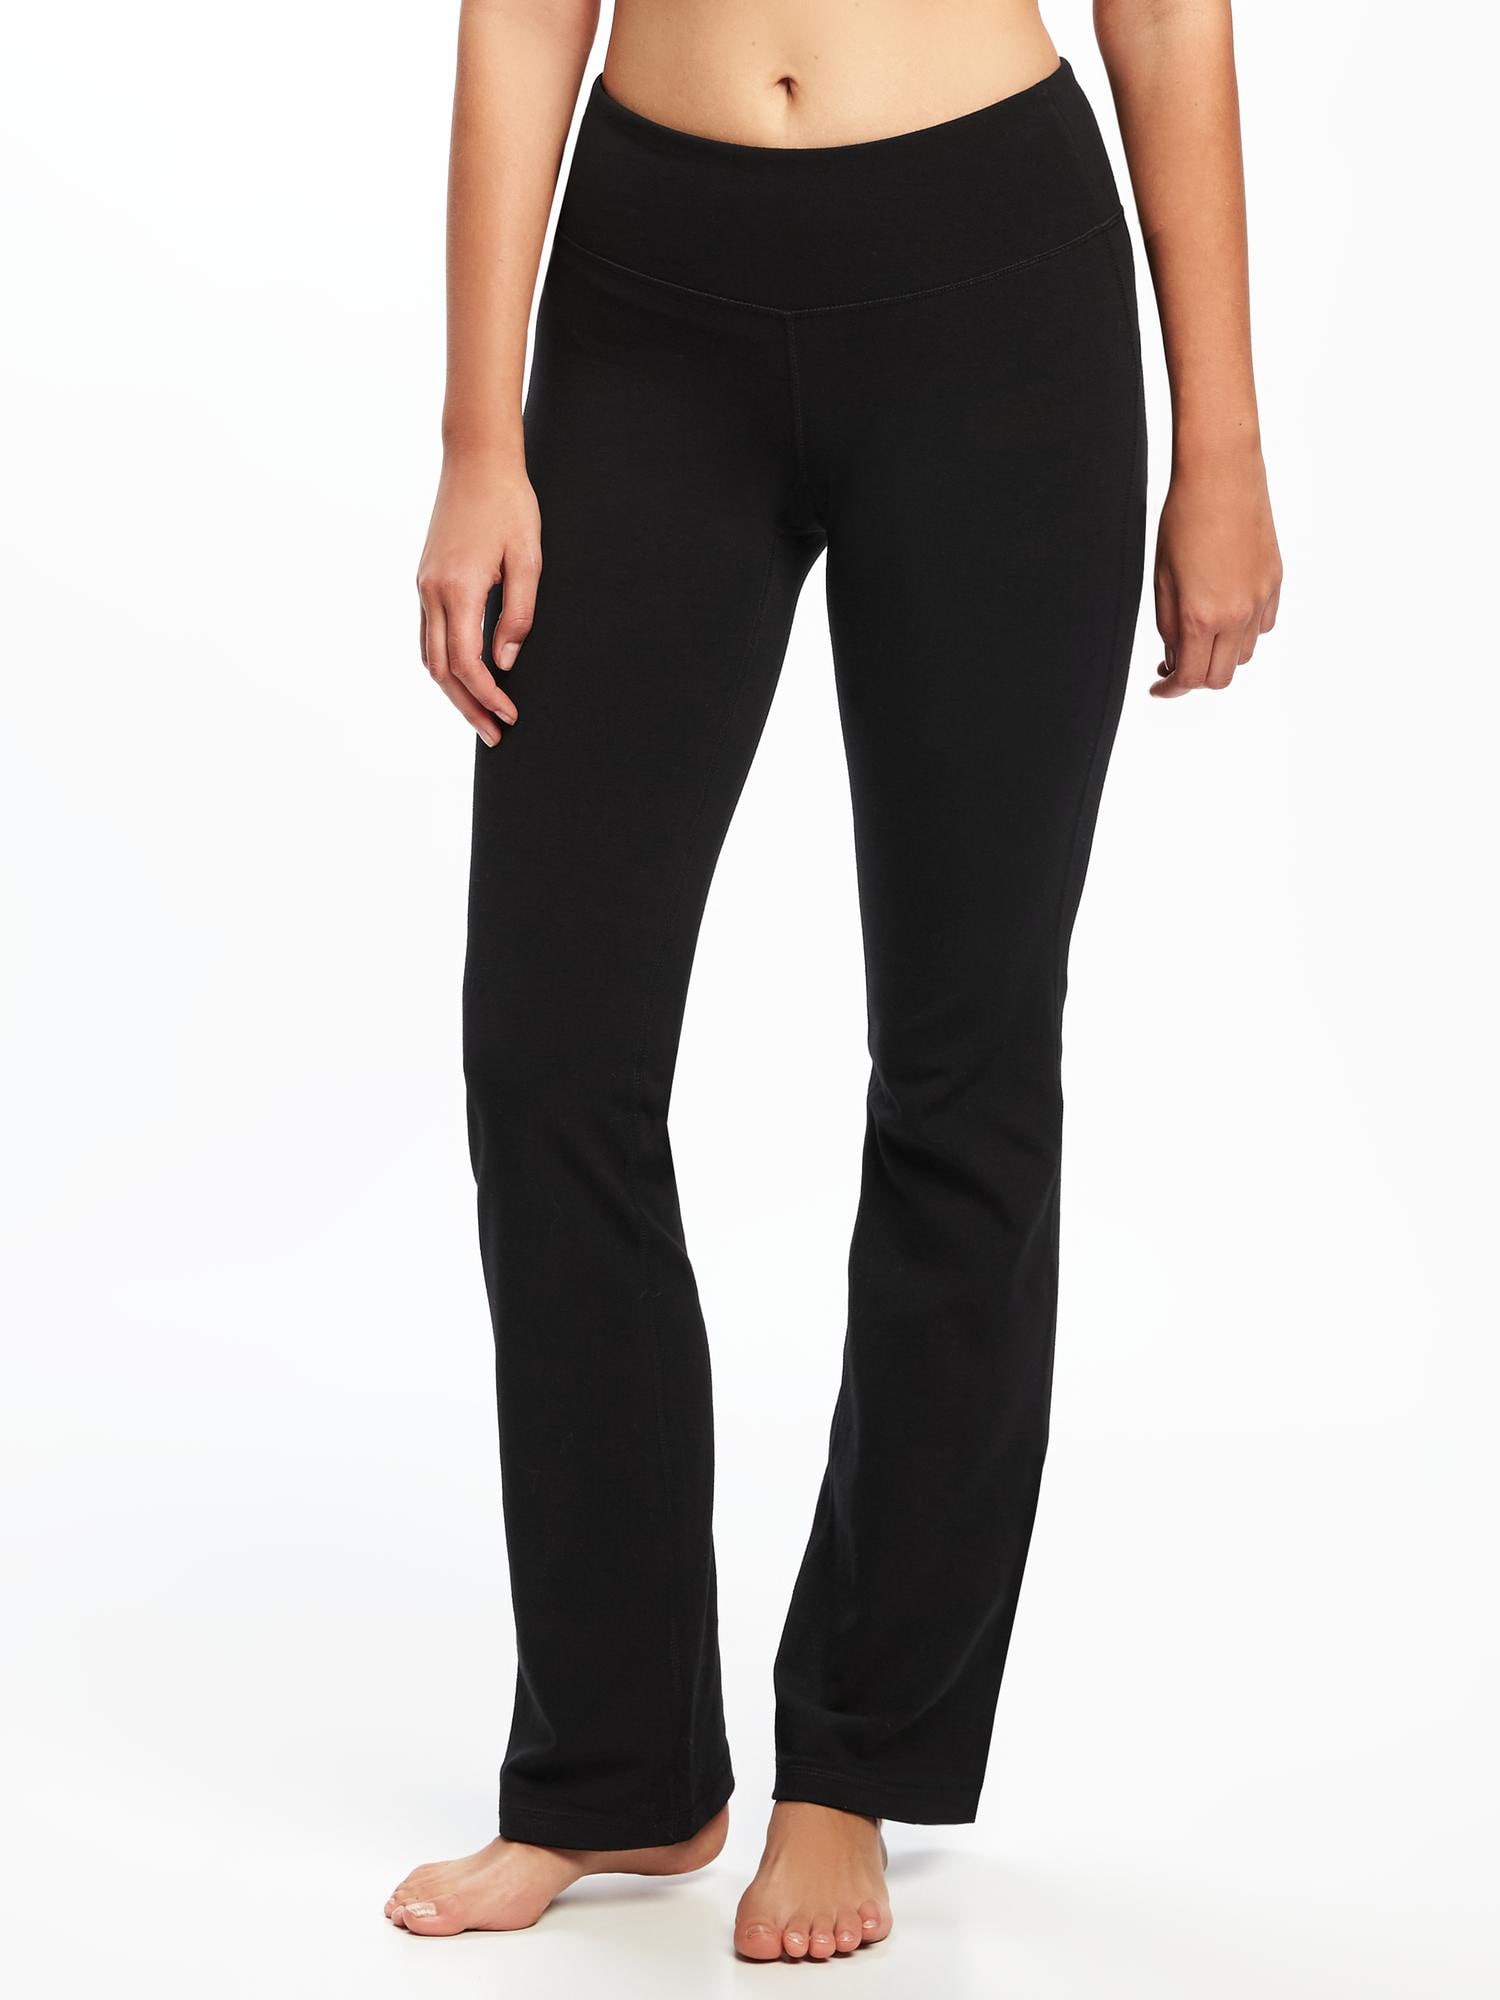 Active by Old Navy Black Yoga Pants Size XL - 40% off